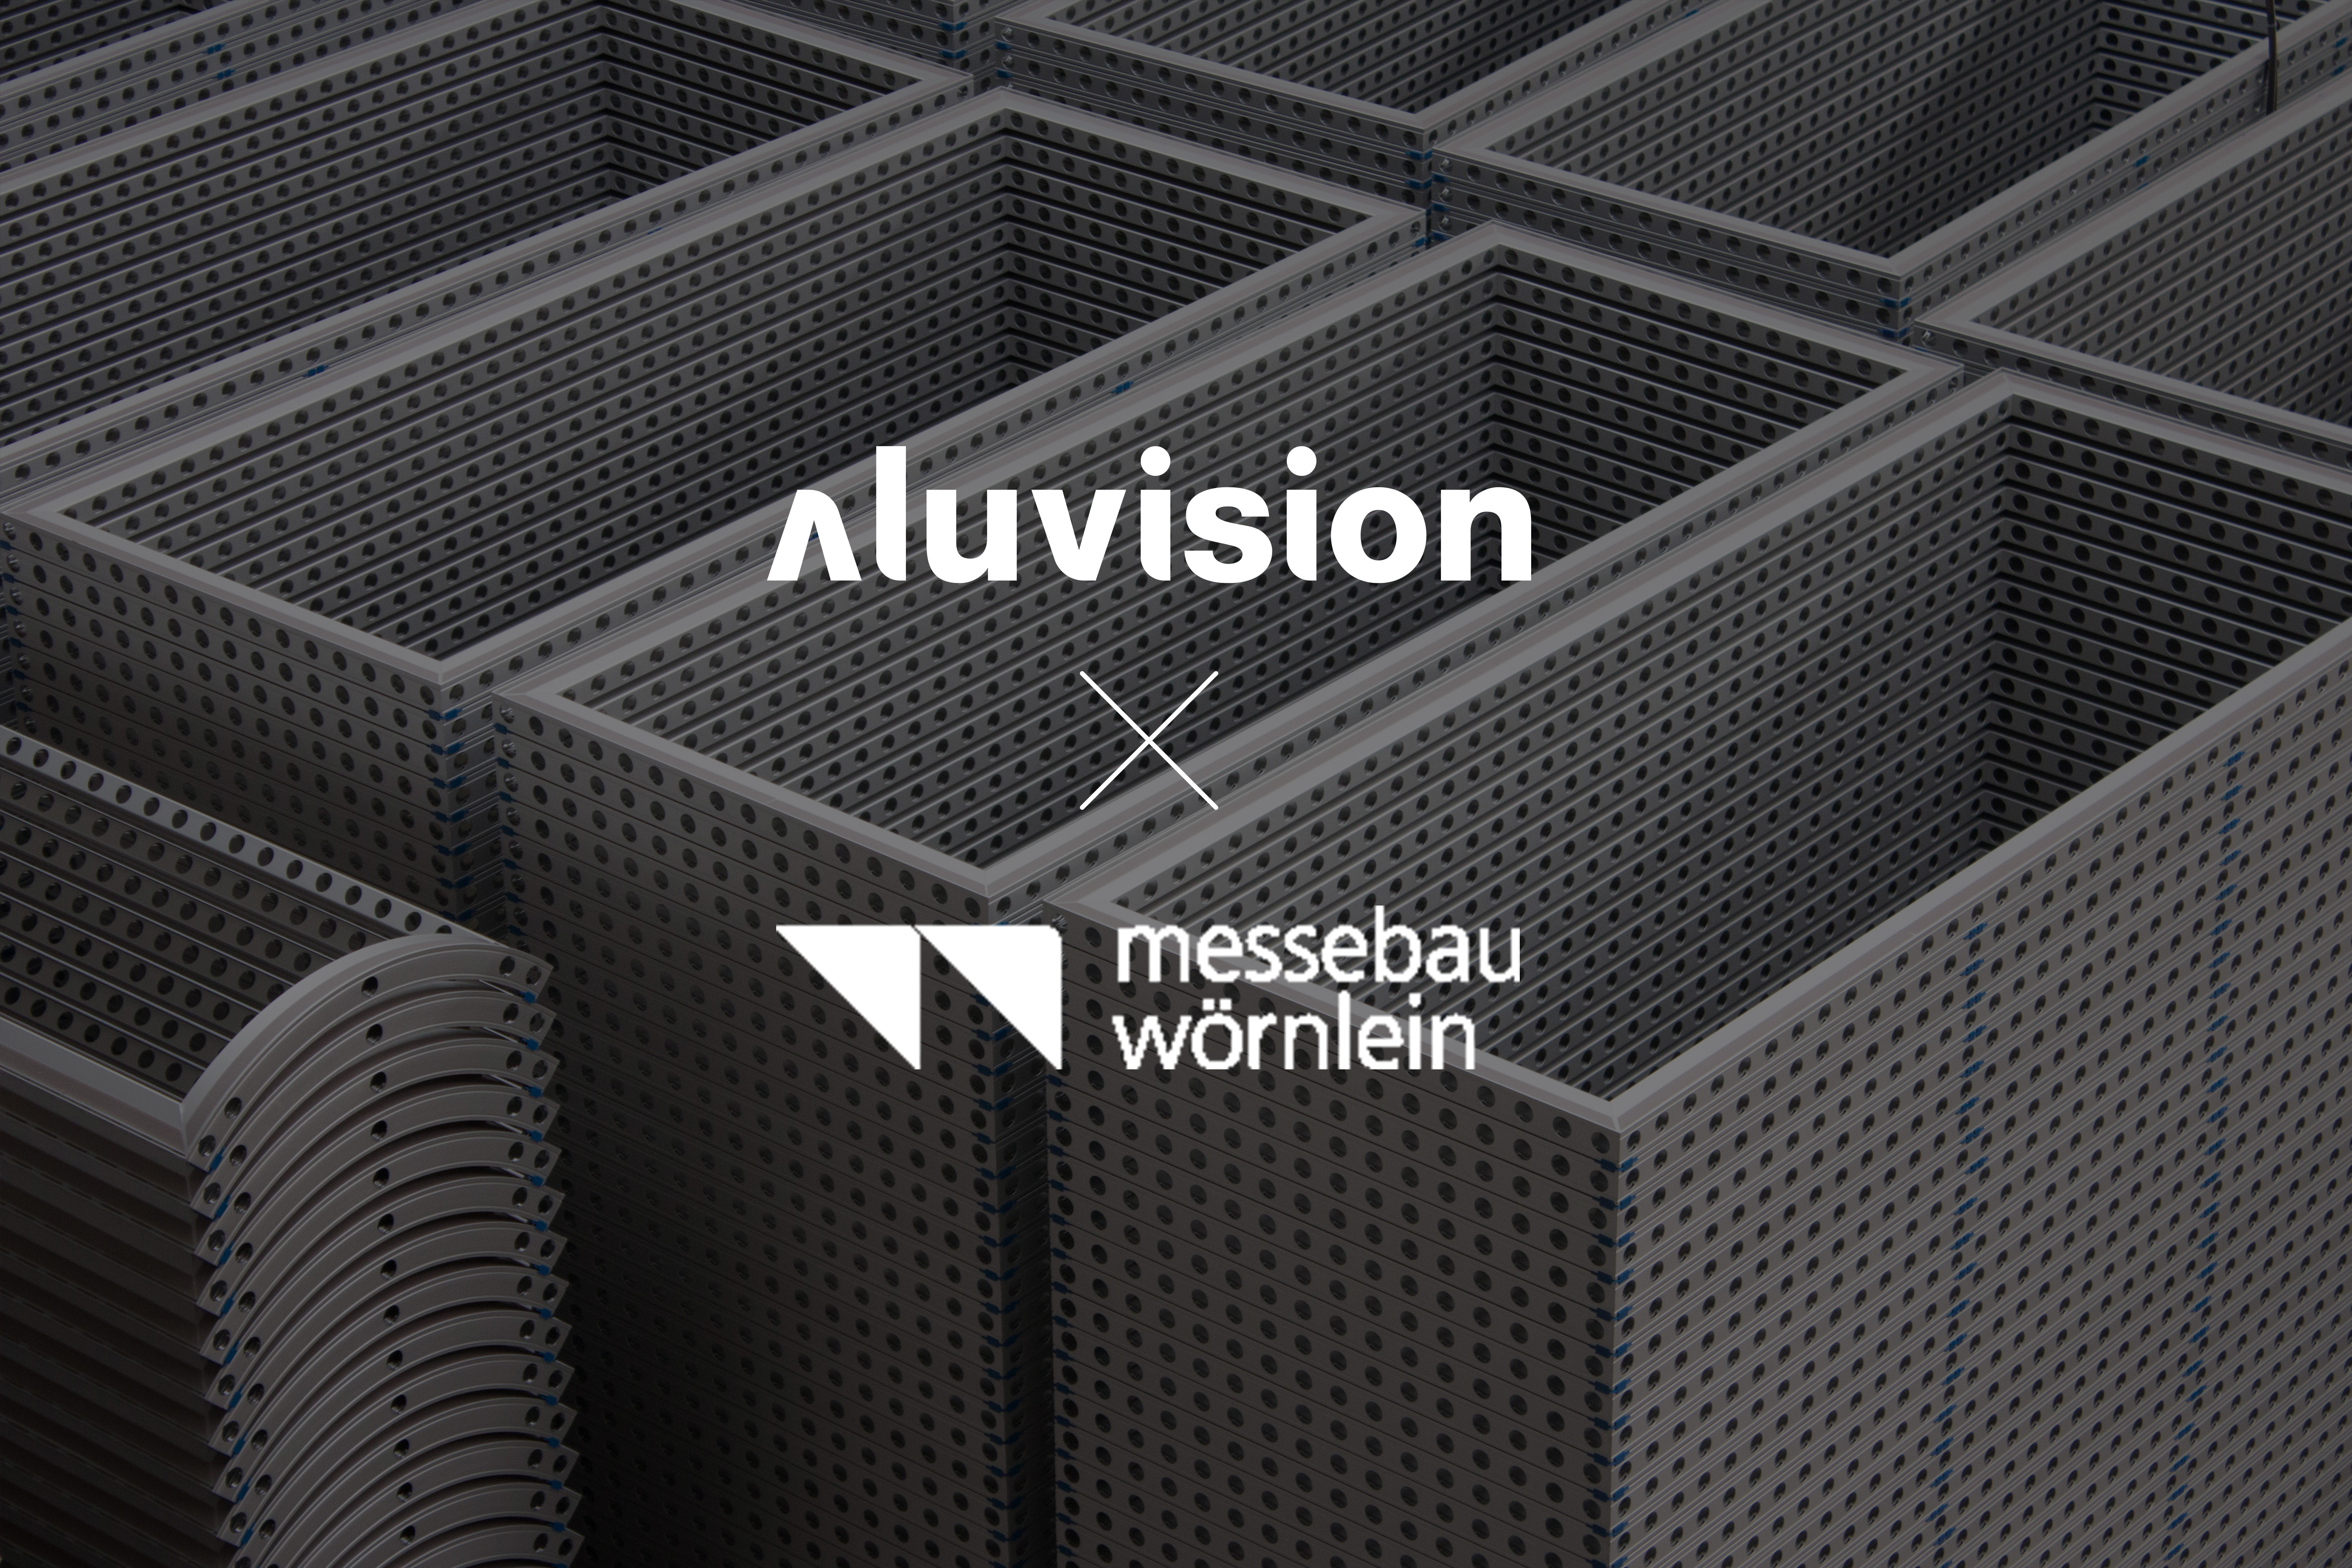 Messebau Wörnlein will build the majority of its individual stands with Aluvision from 2023 onwards